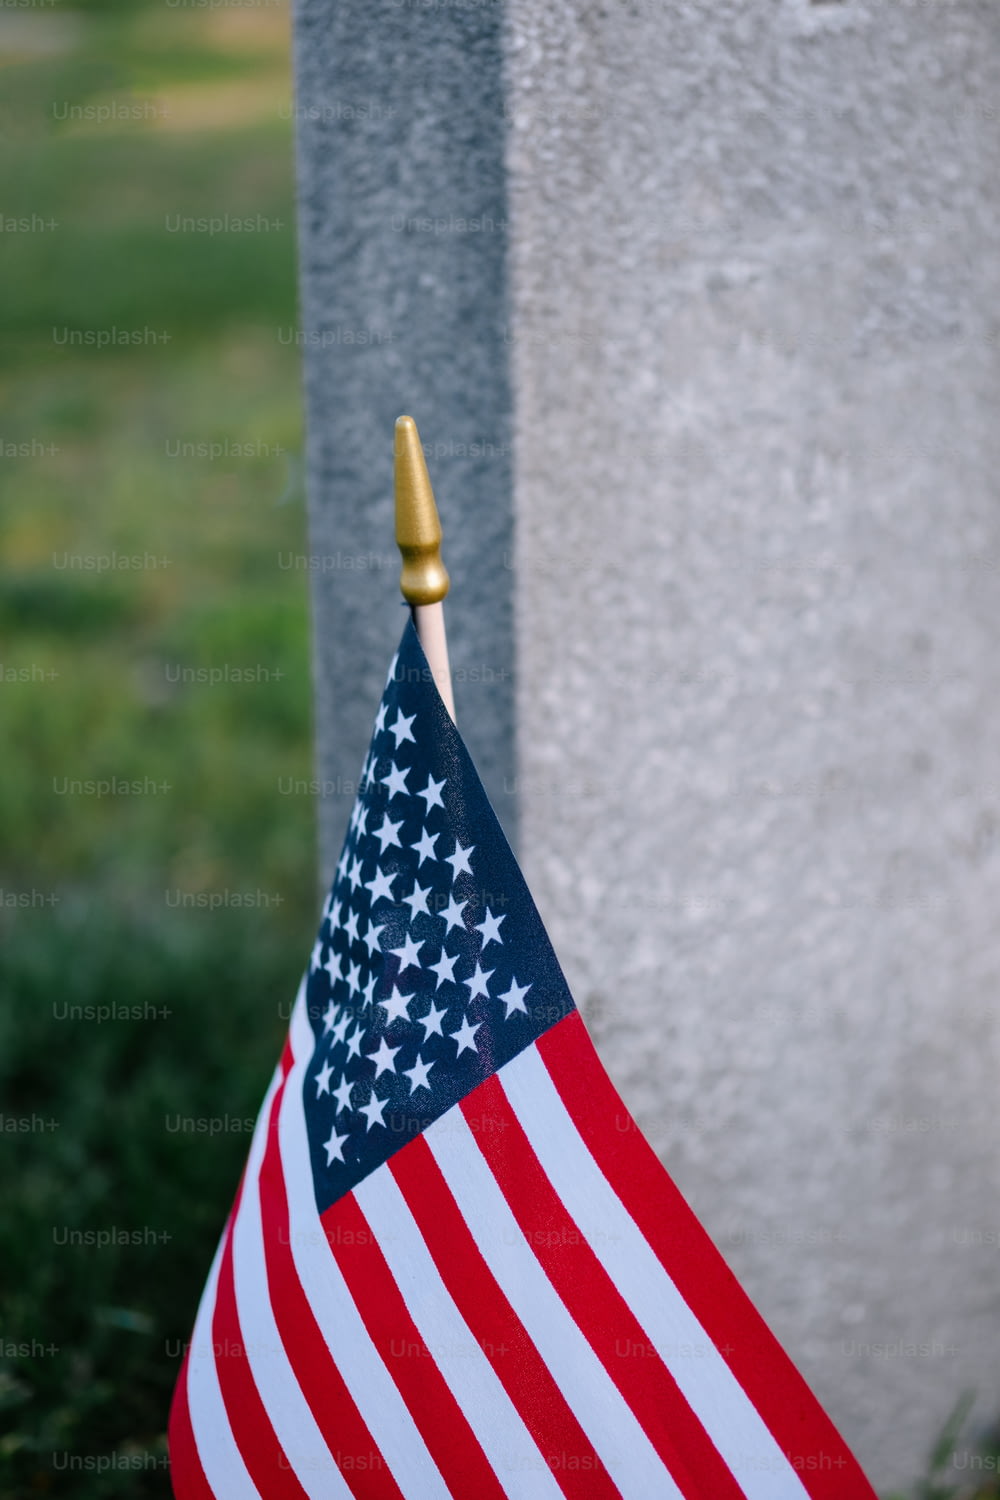 a small american flag is placed next to a grave